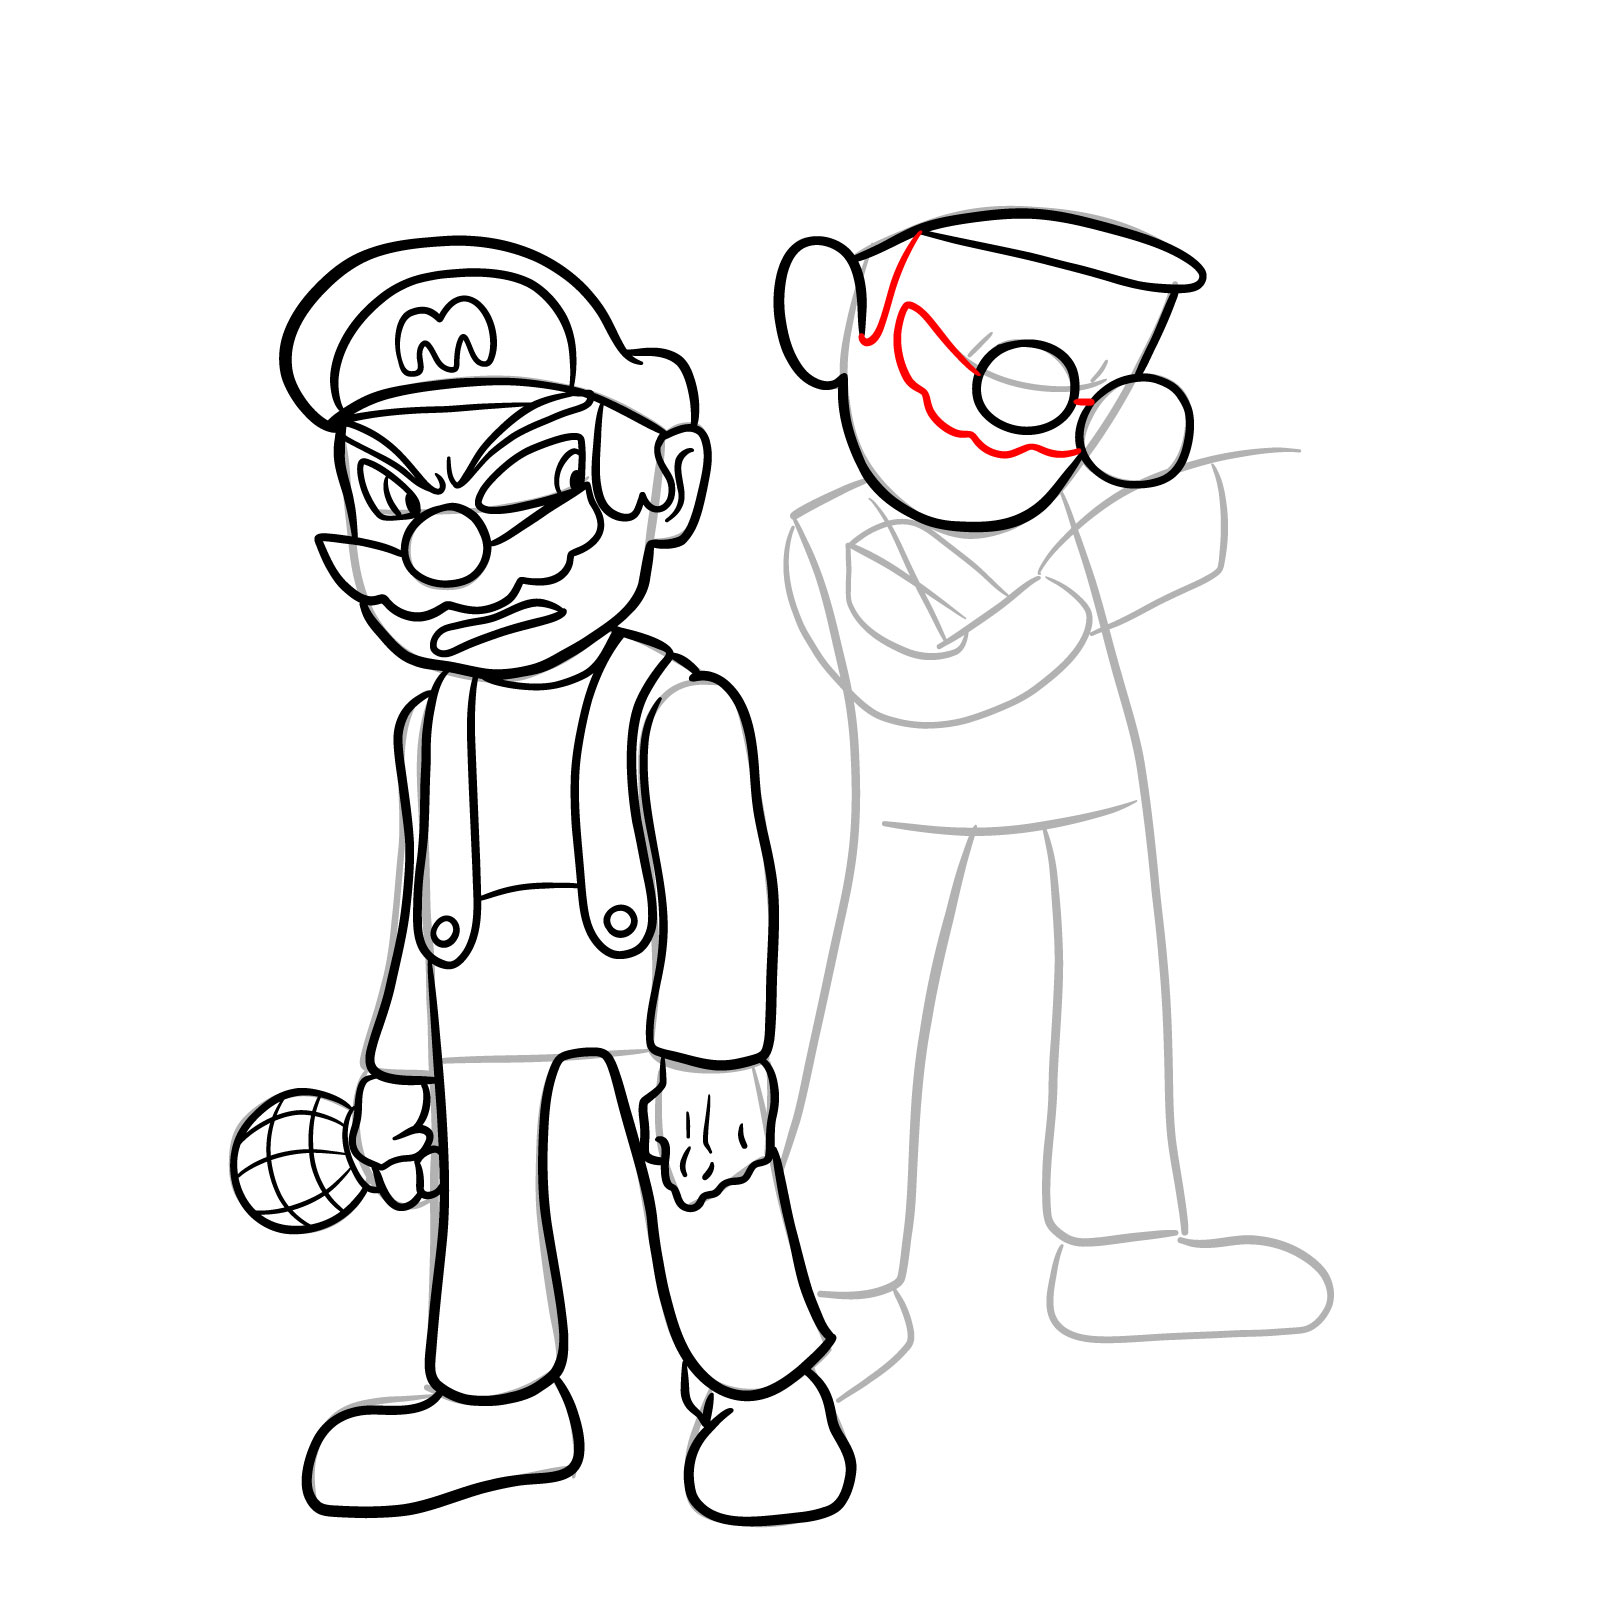 How to draw Mario and Luigi from Tails Gets Trolled - step 28